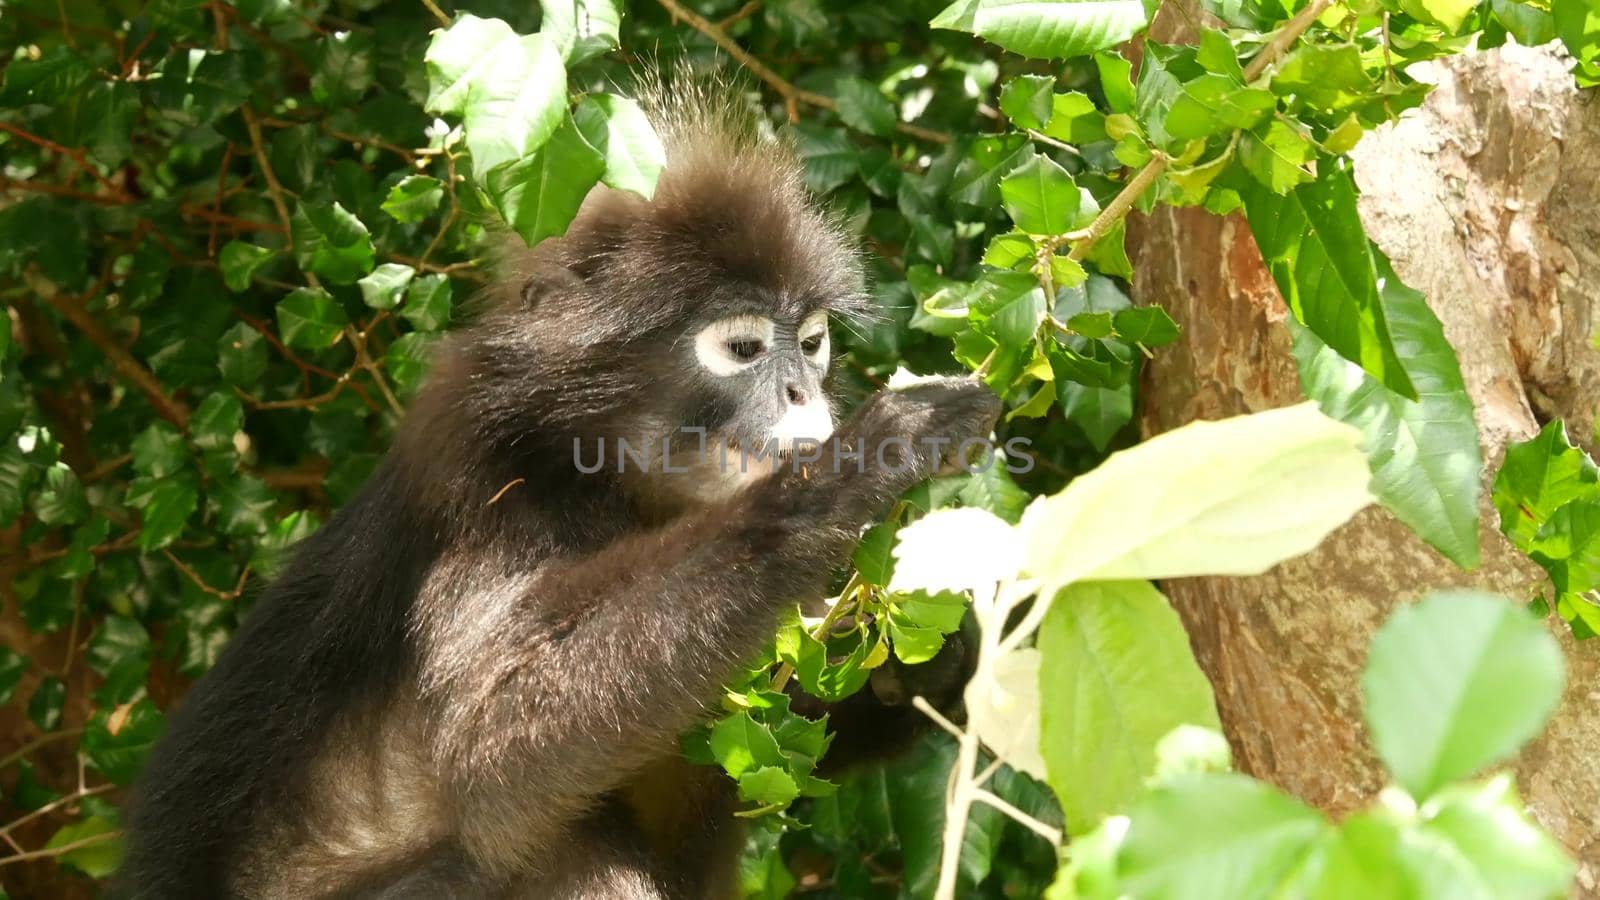 Cute spectacled leaf langur, dusky monkey on tree branch amidst green leaves in Ang Thong national park in natural habitat. Wildlife of endangered species of animals. Environment conservation concept.